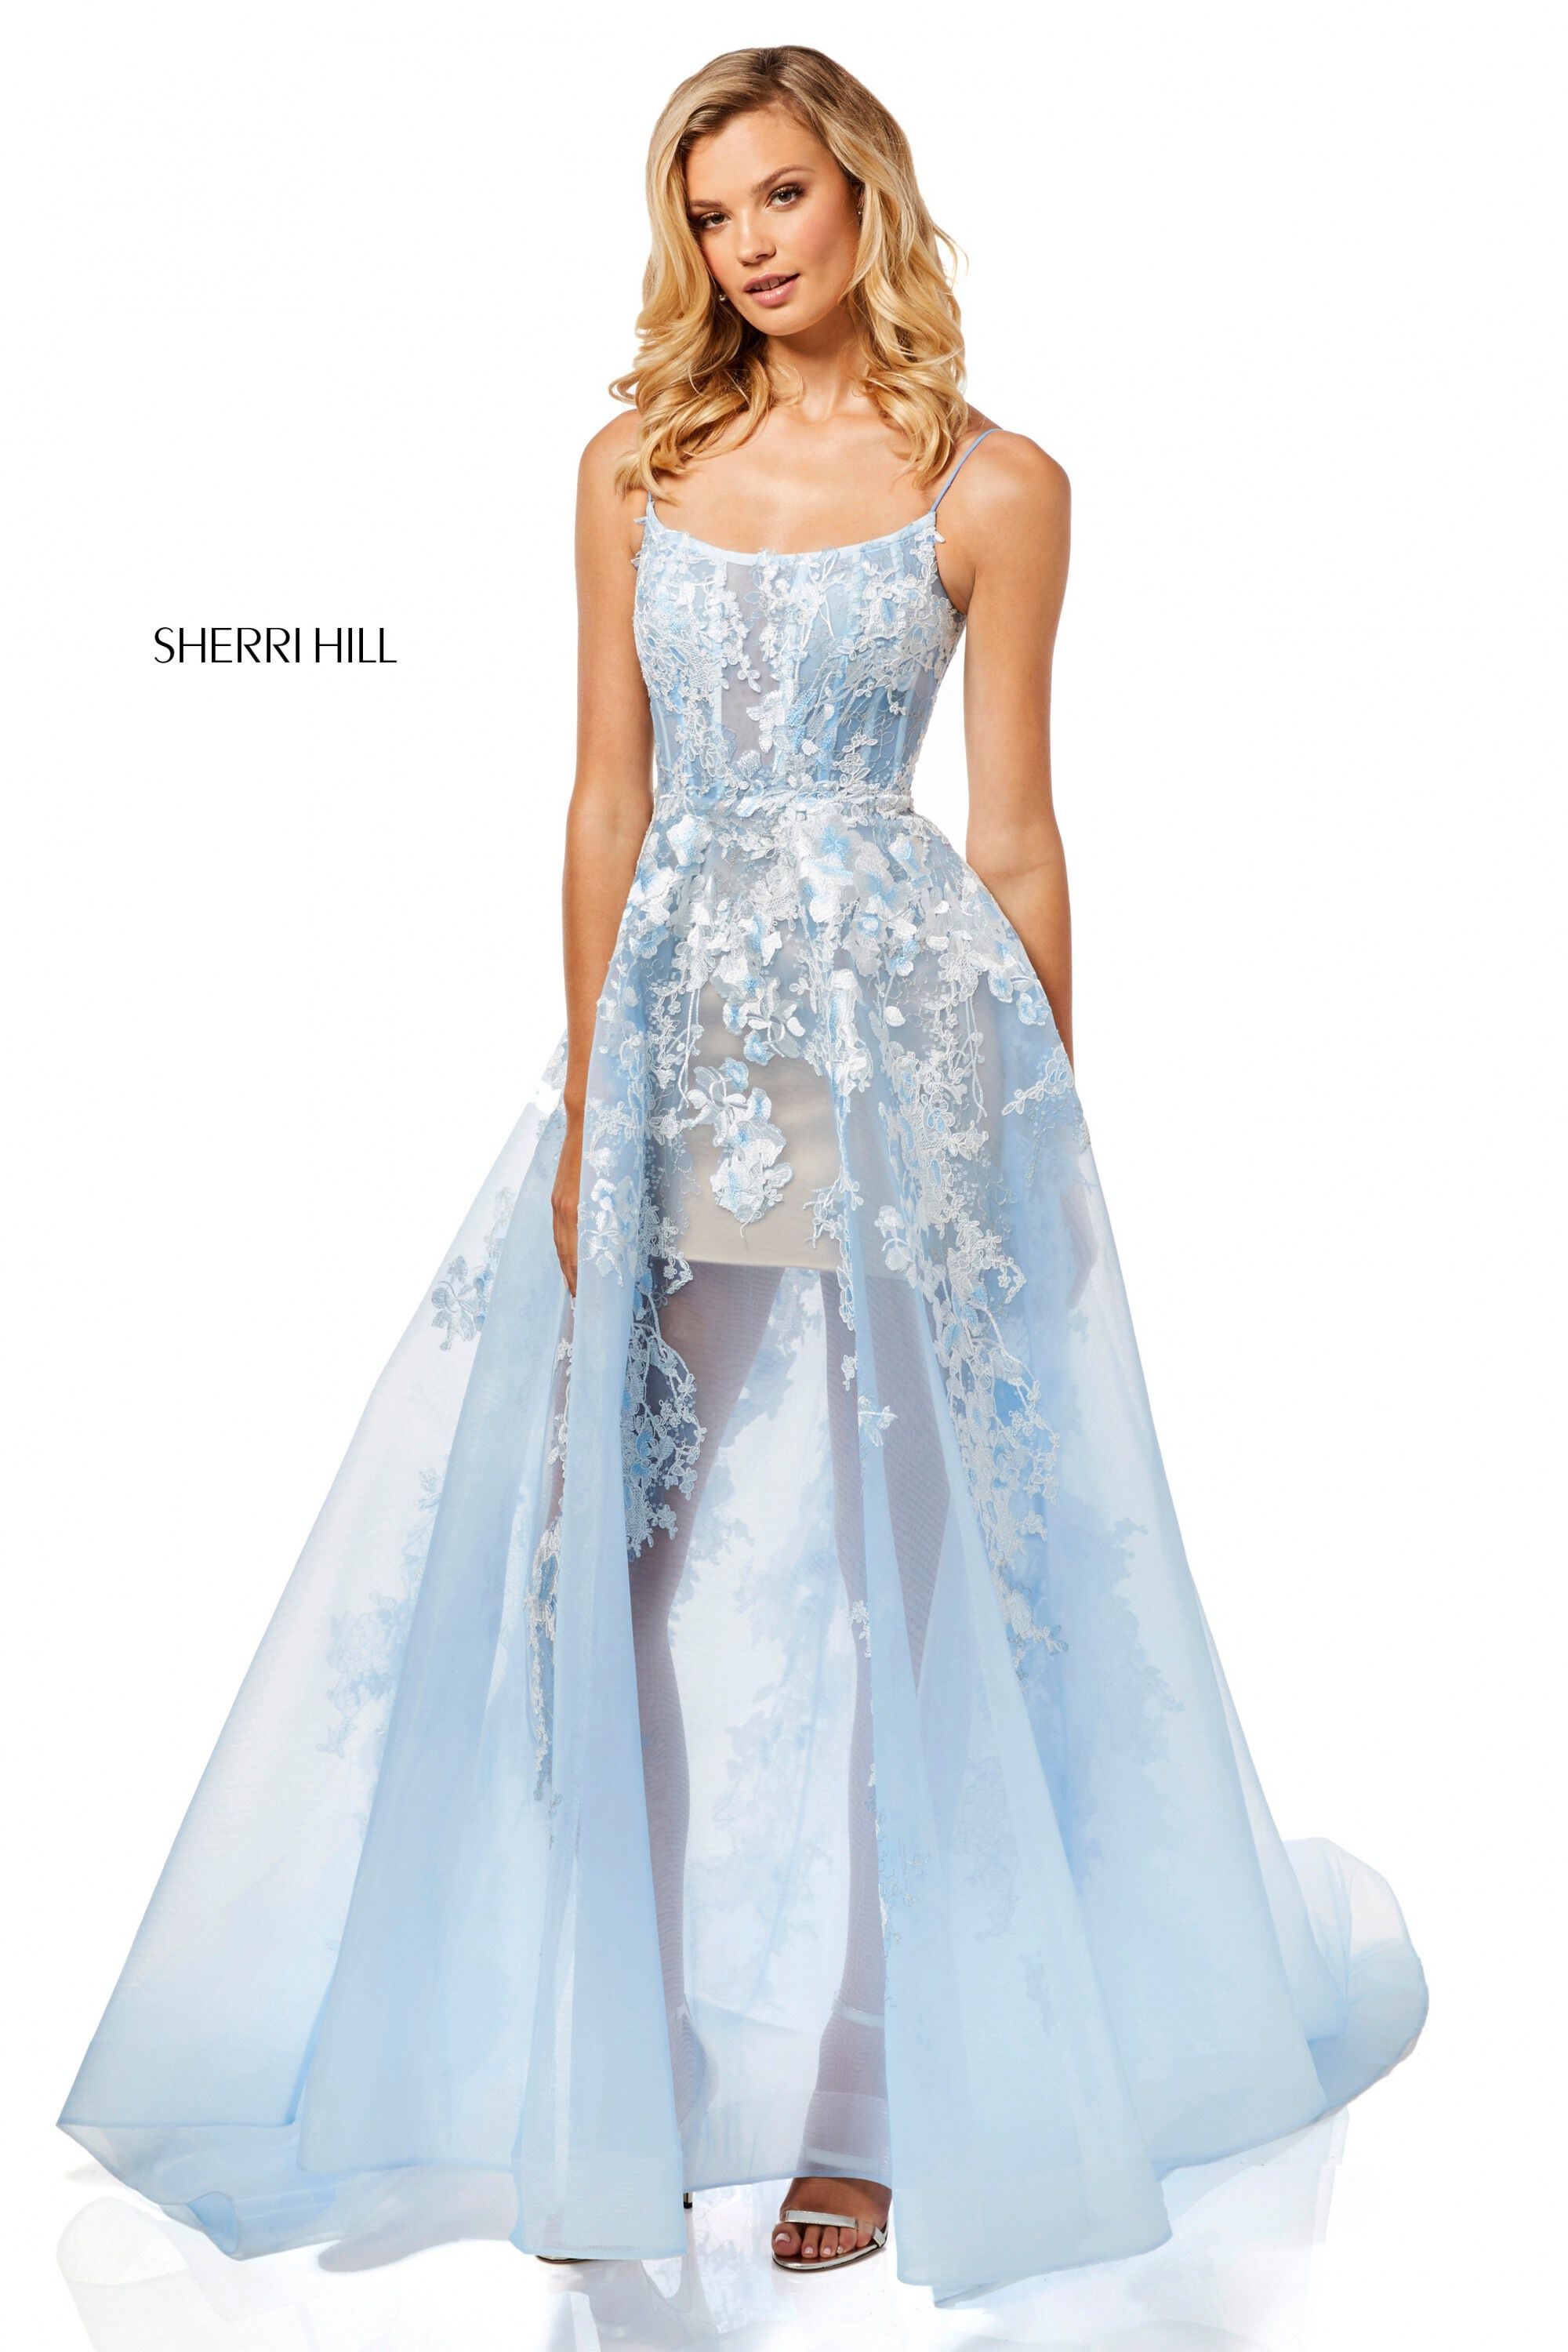 style № 52448 designed by SherriHill